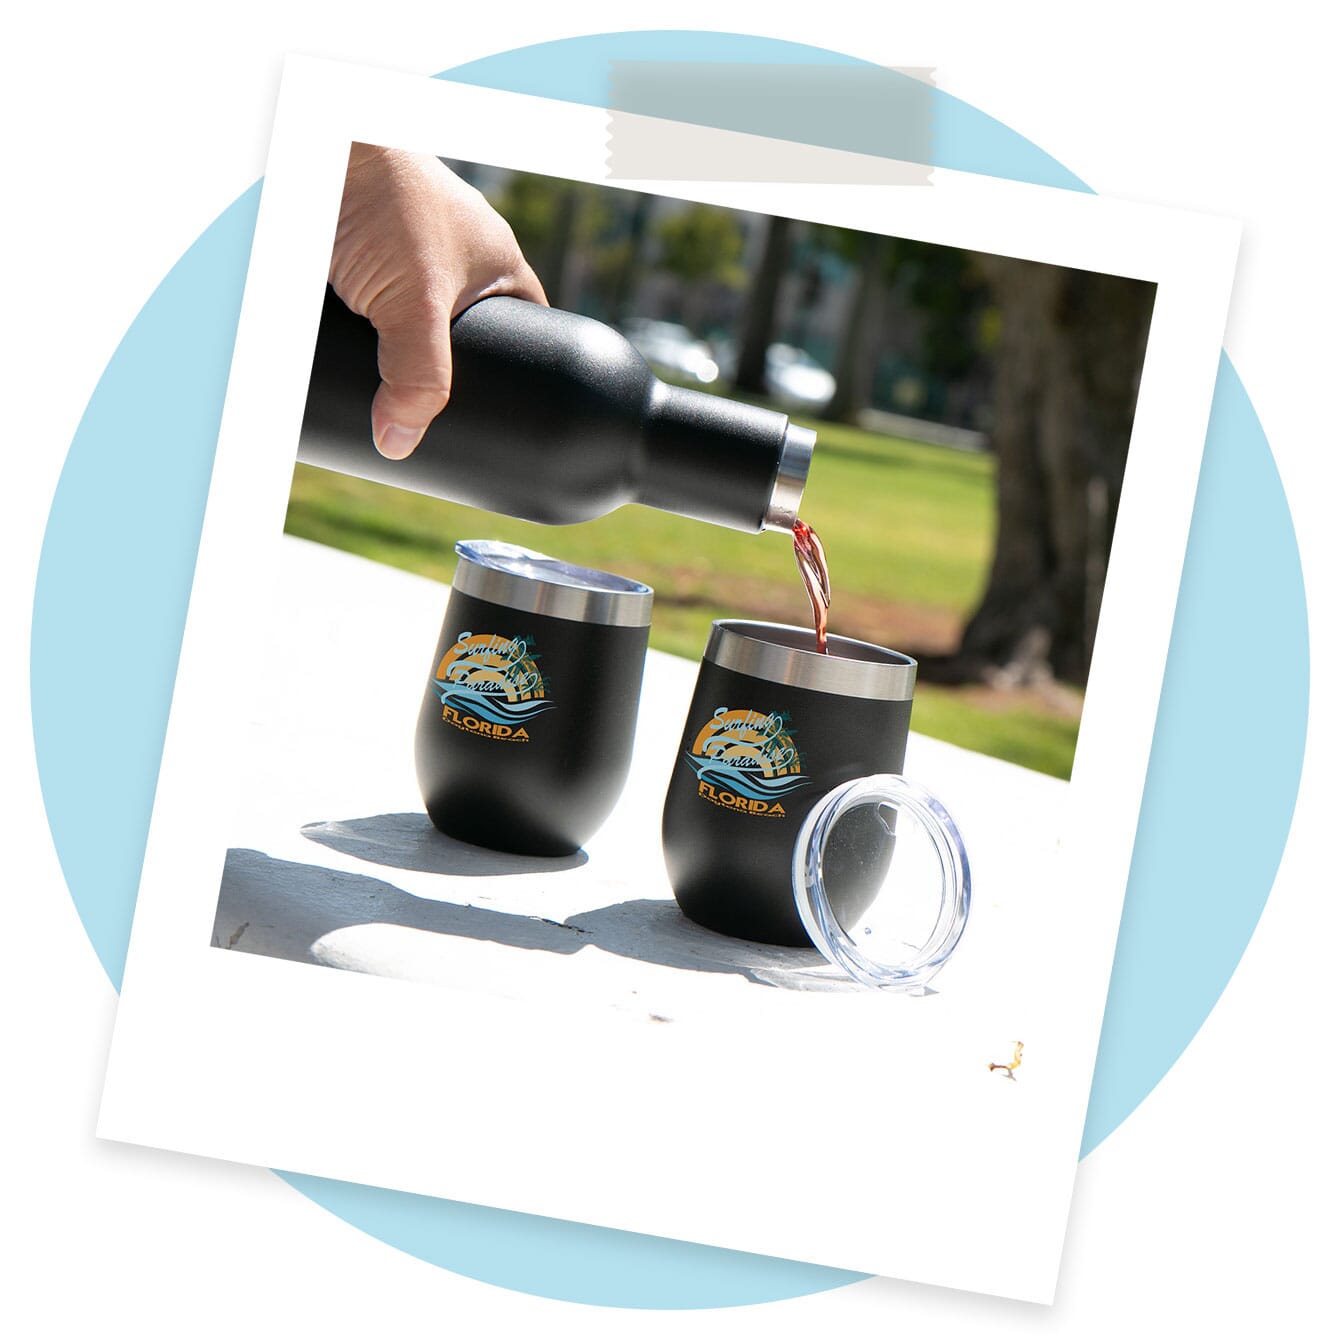 Tumbler gift set for arrival gifts